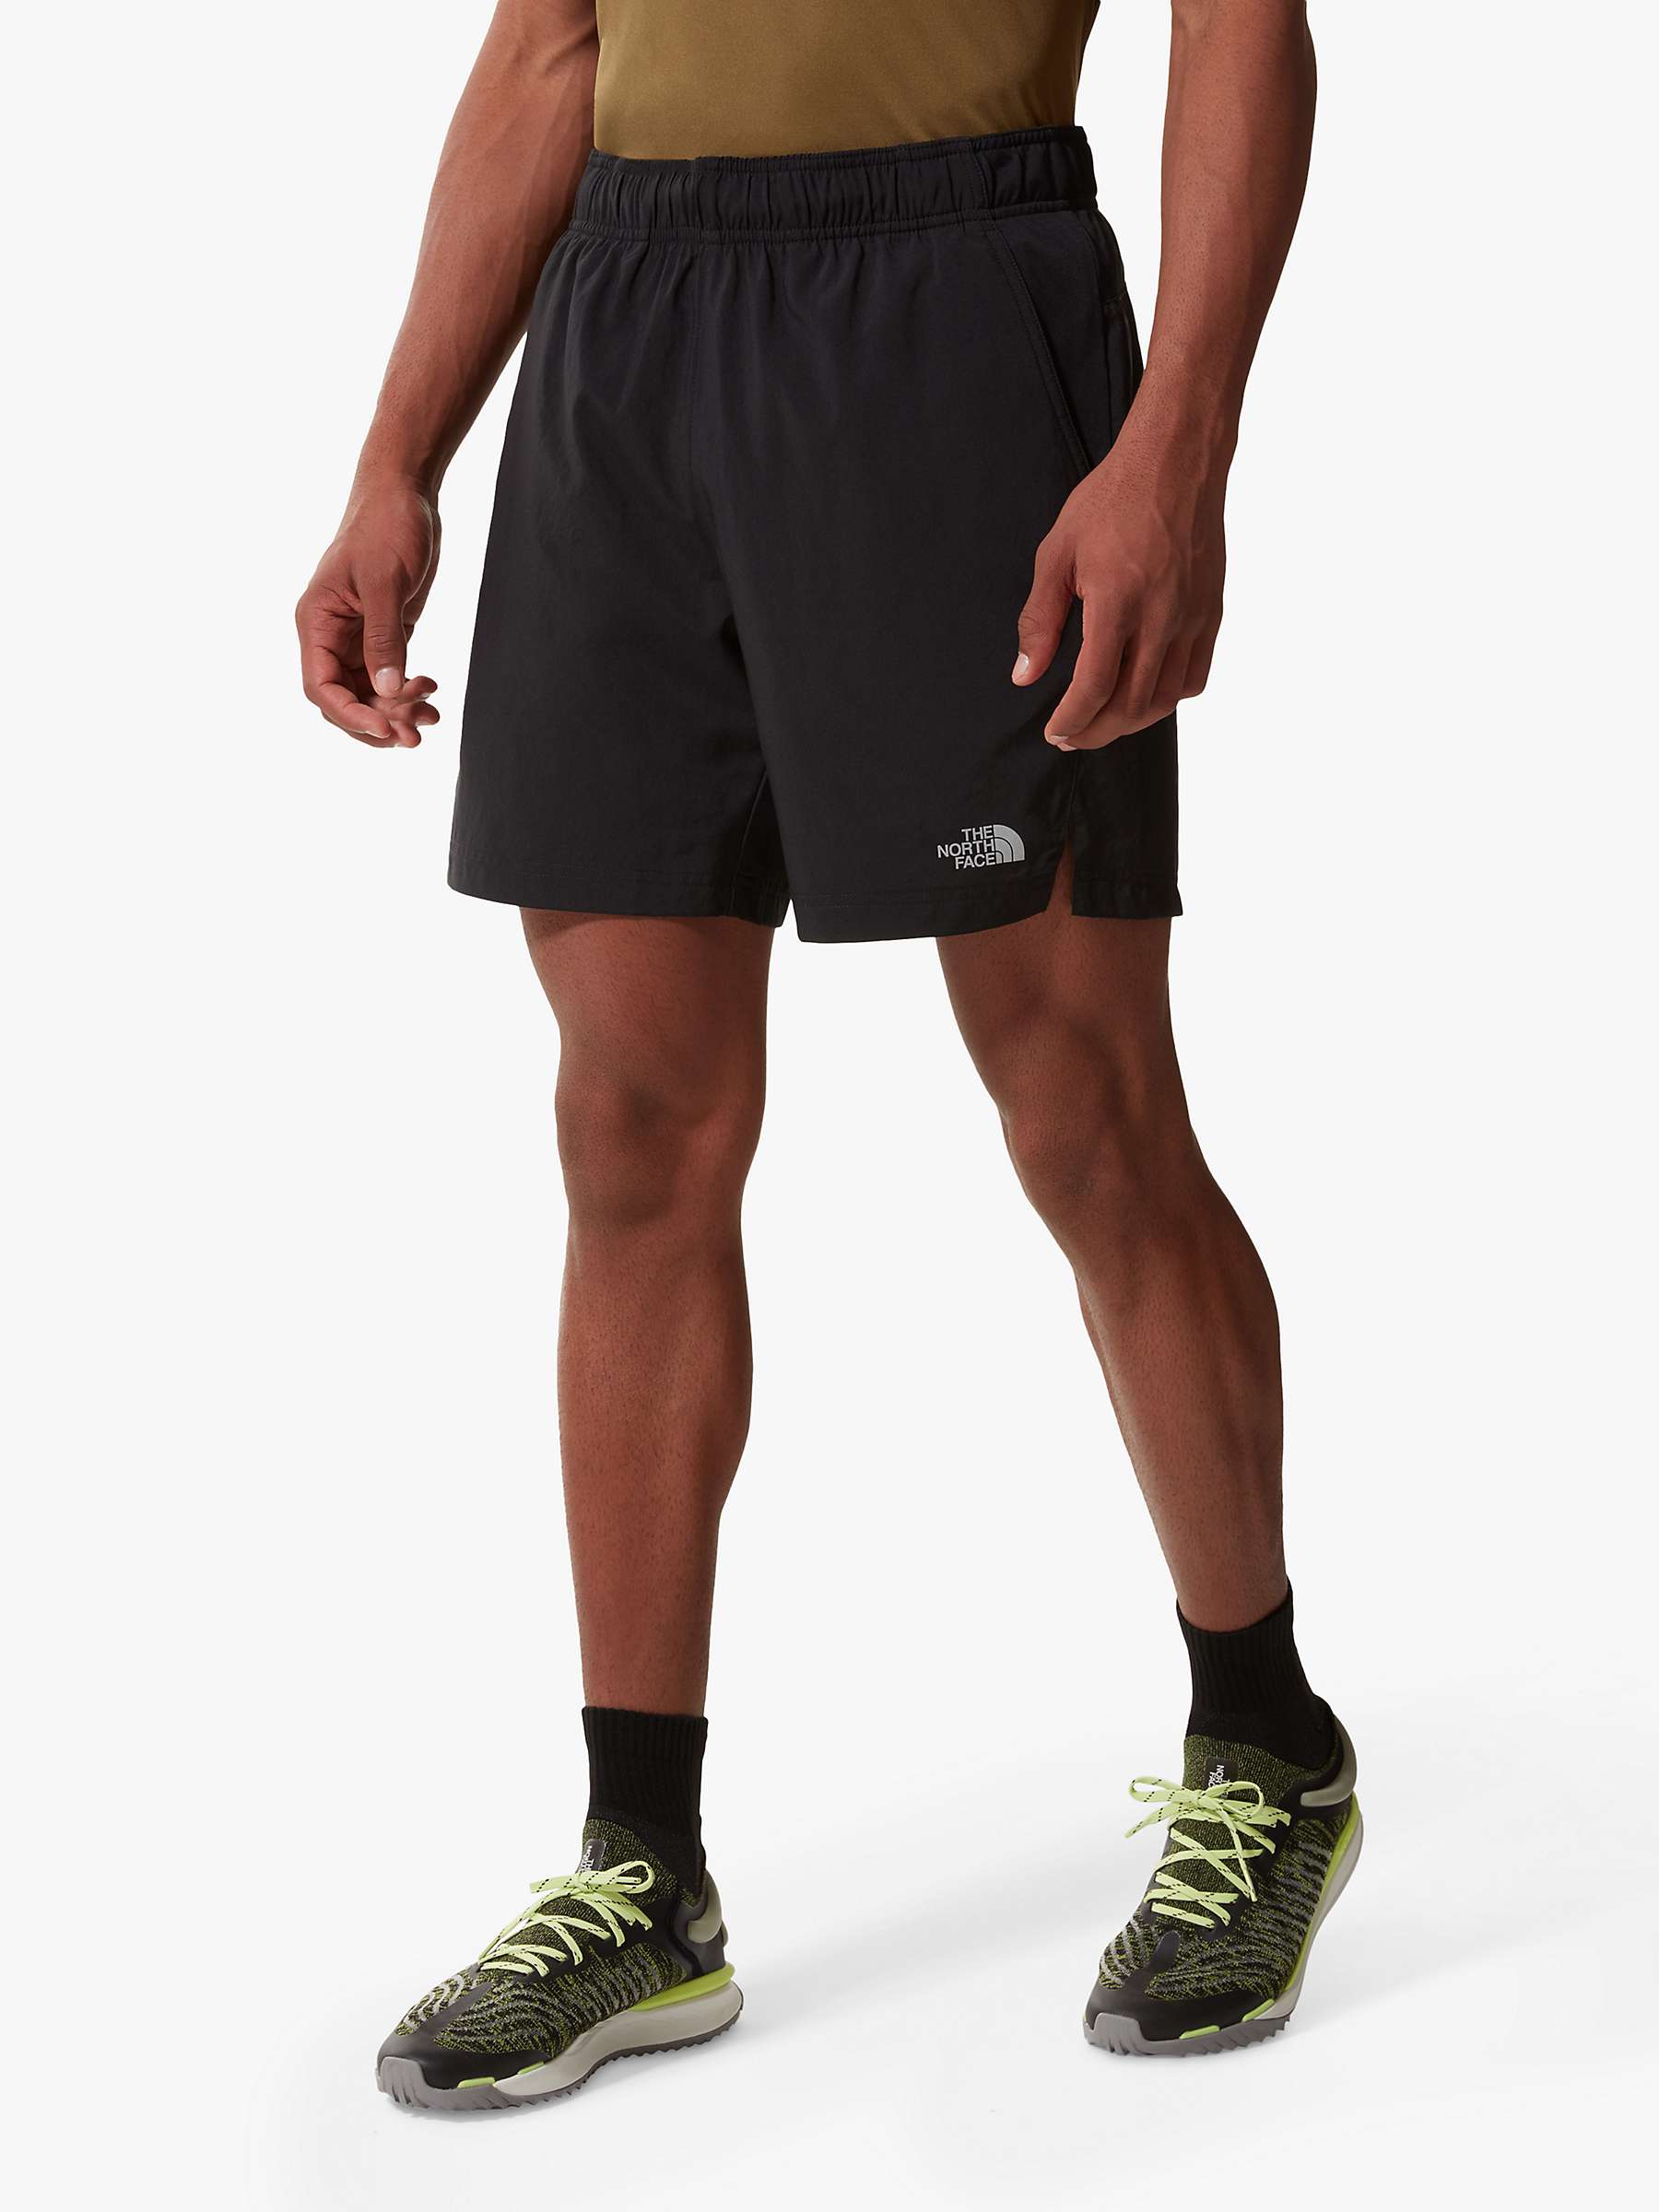 Buy The North Face 24/7 Shorts, TNF Black Online at johnlewis.com